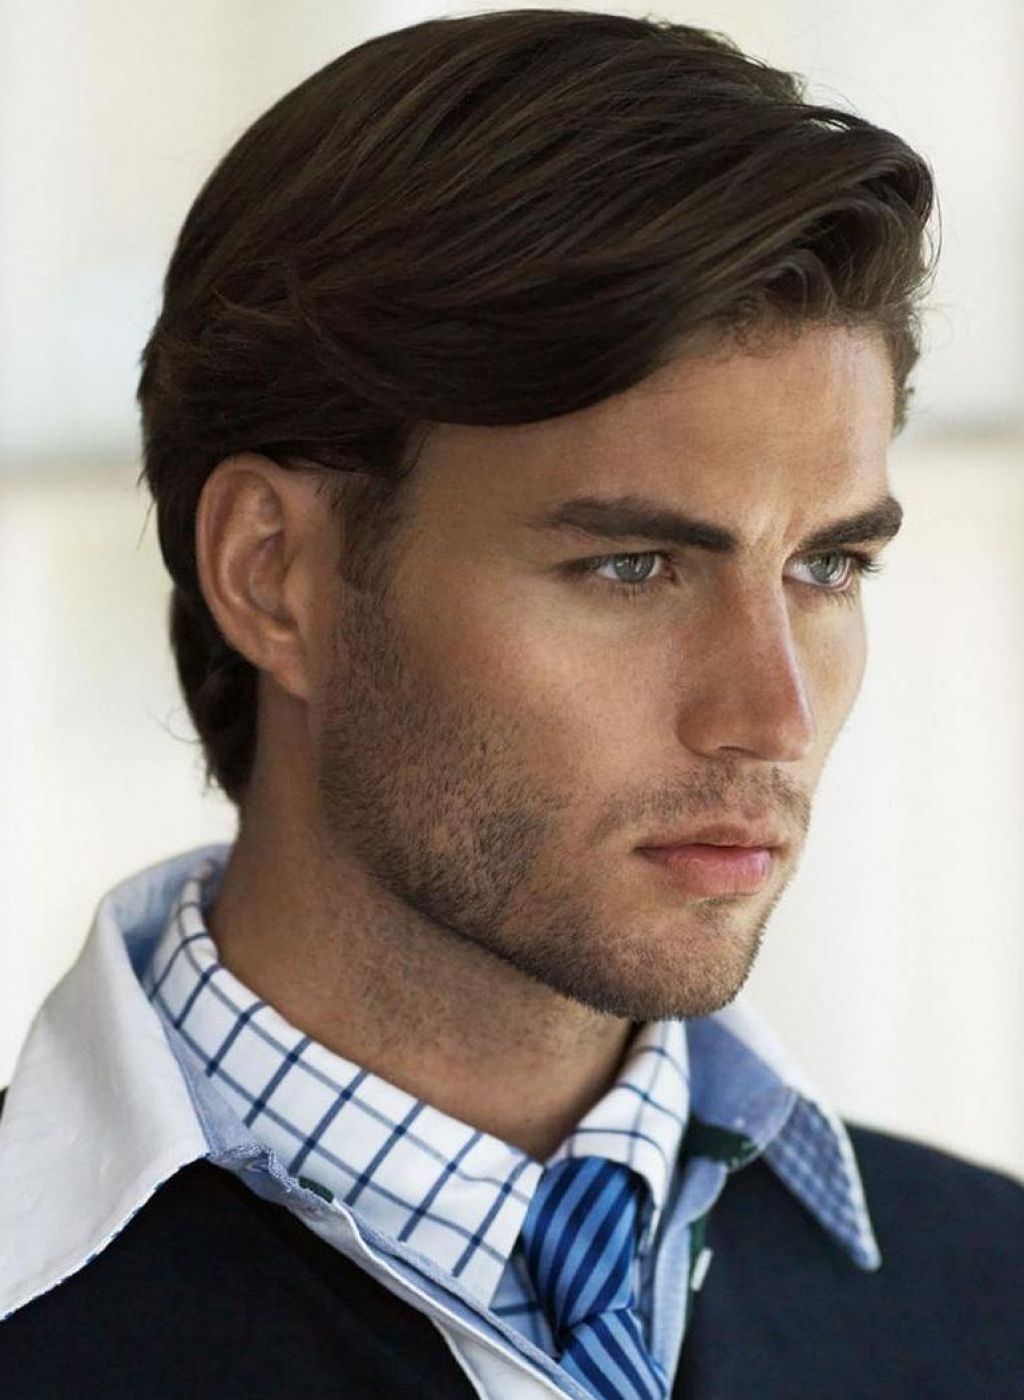 Man with Long in Front, Short in Back Hairstyle